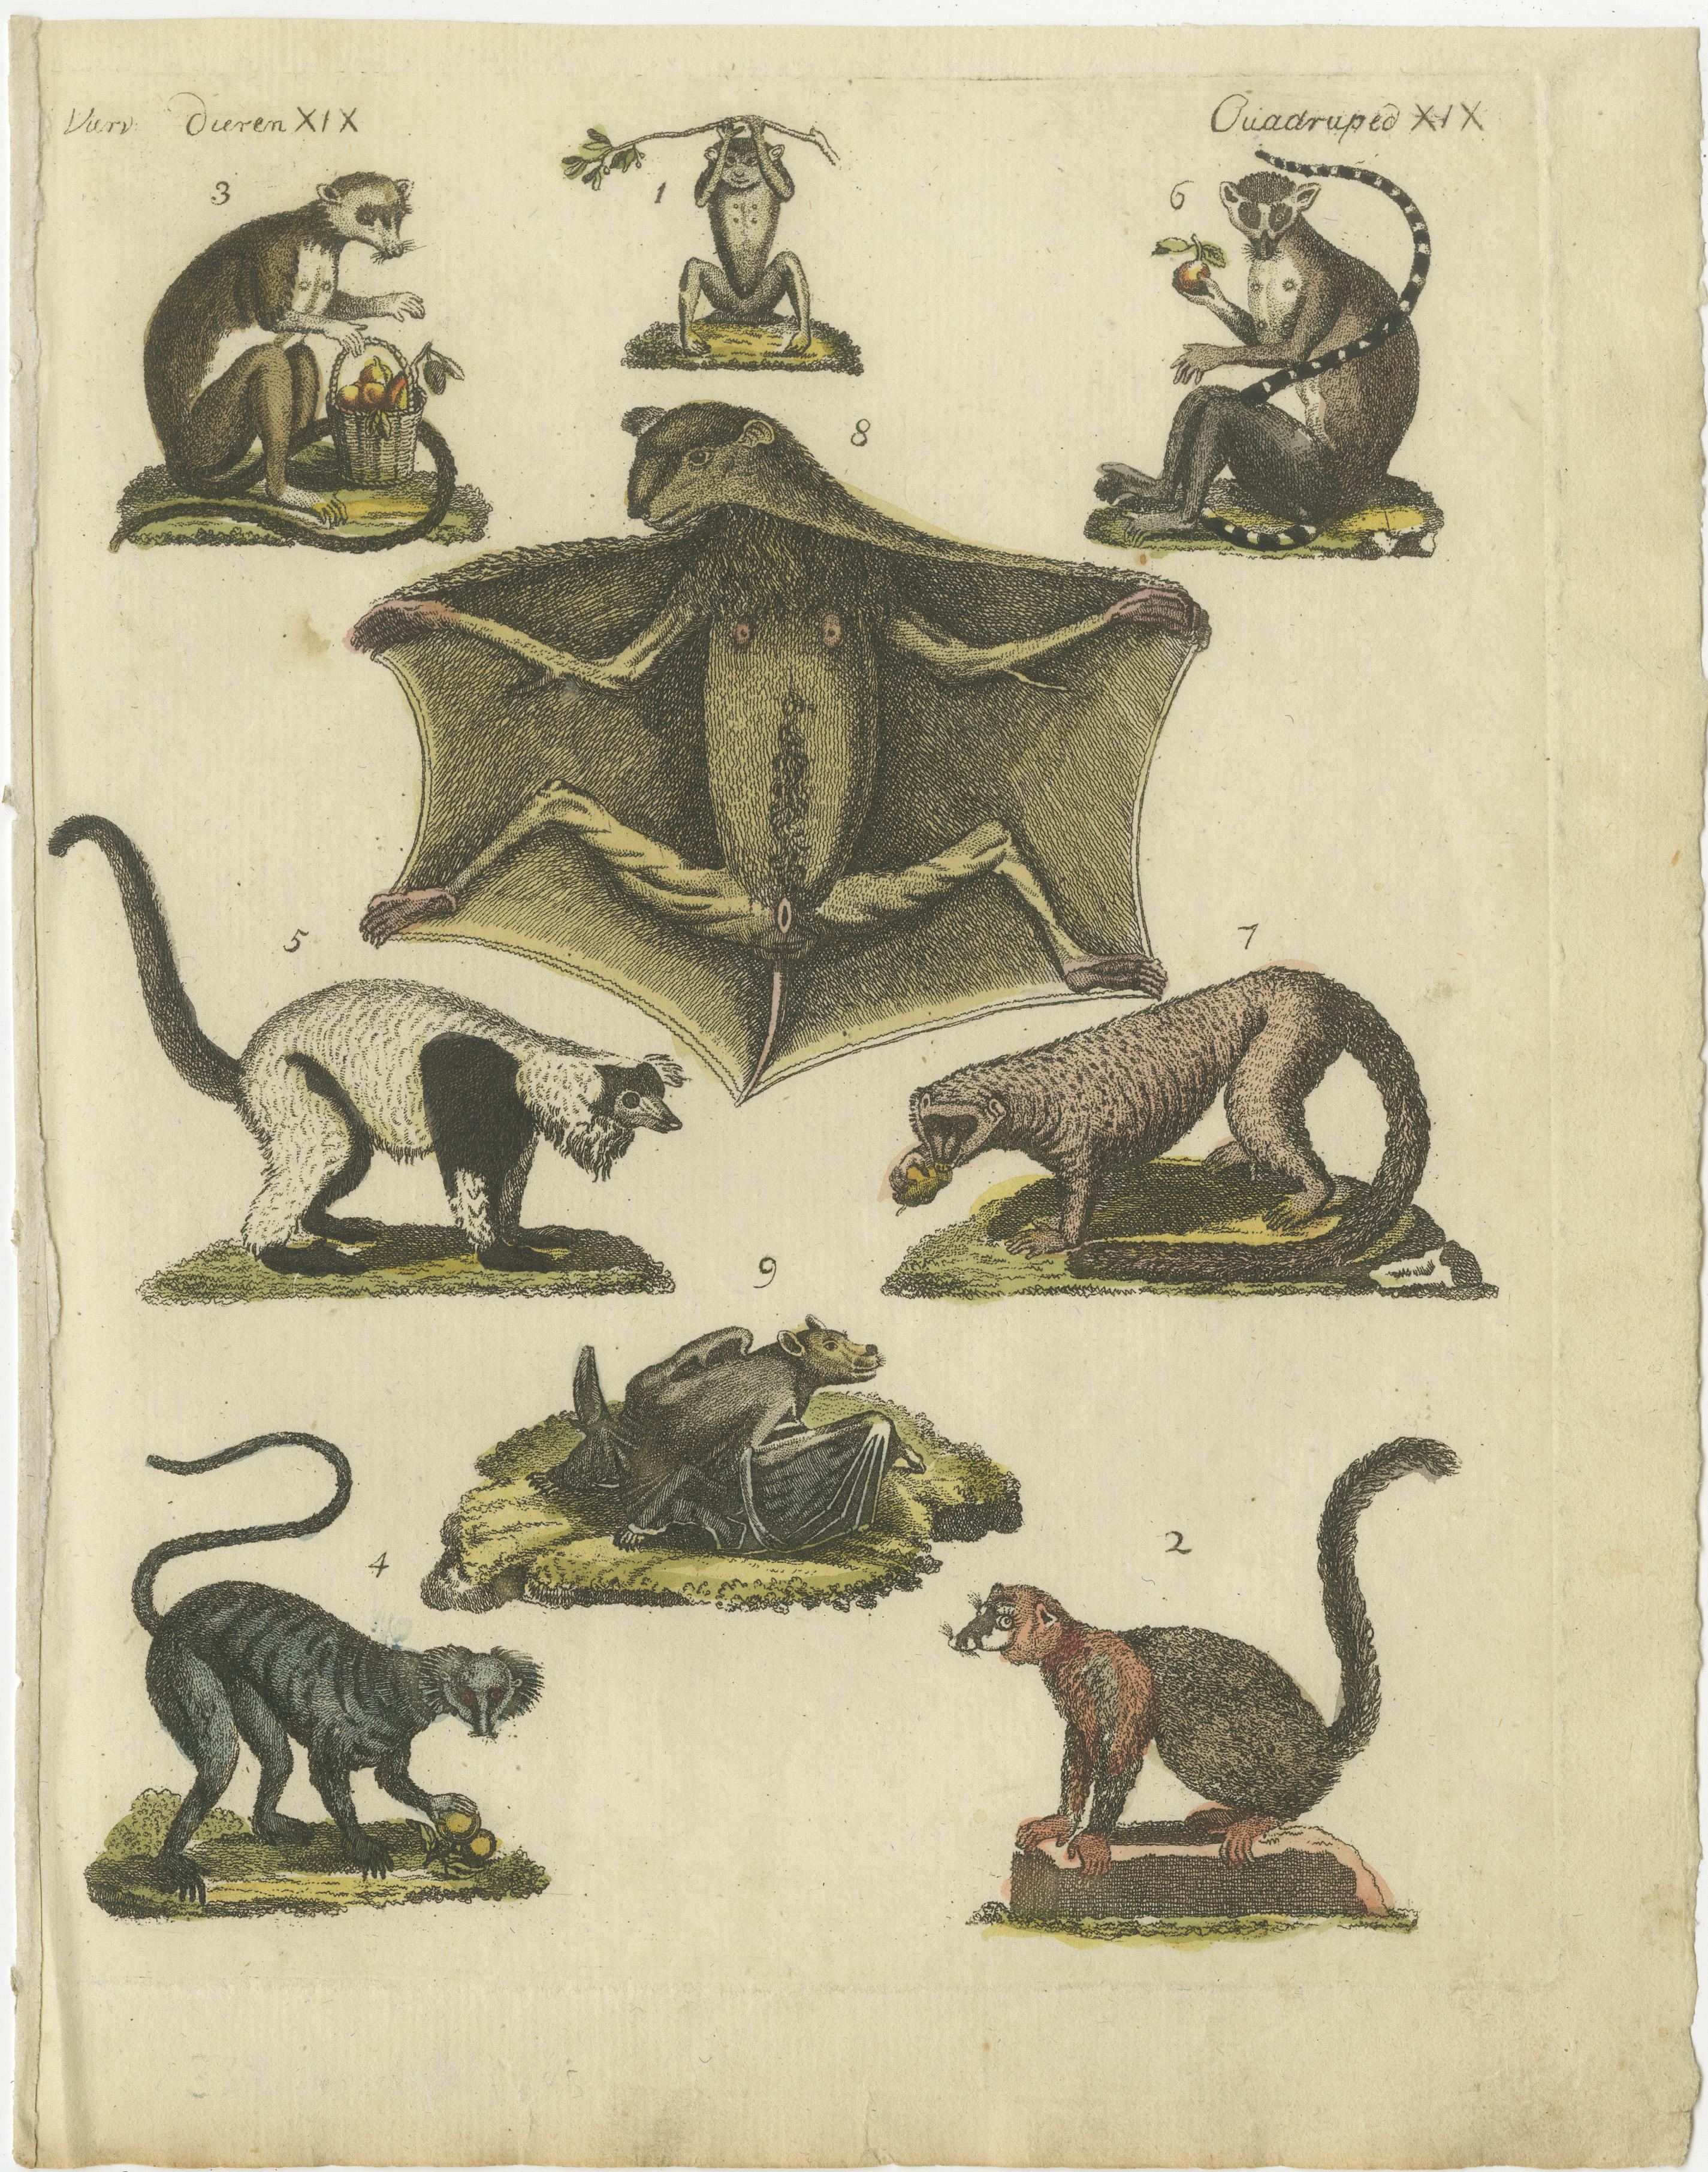 Original antique print of lemurs and the extinct Mauritian flying fox or dark flying fox (Pteropus subniger), known as a rougette to early French travelers. This engraved print originates from a very rare unknown Dutch work. The plates are similar